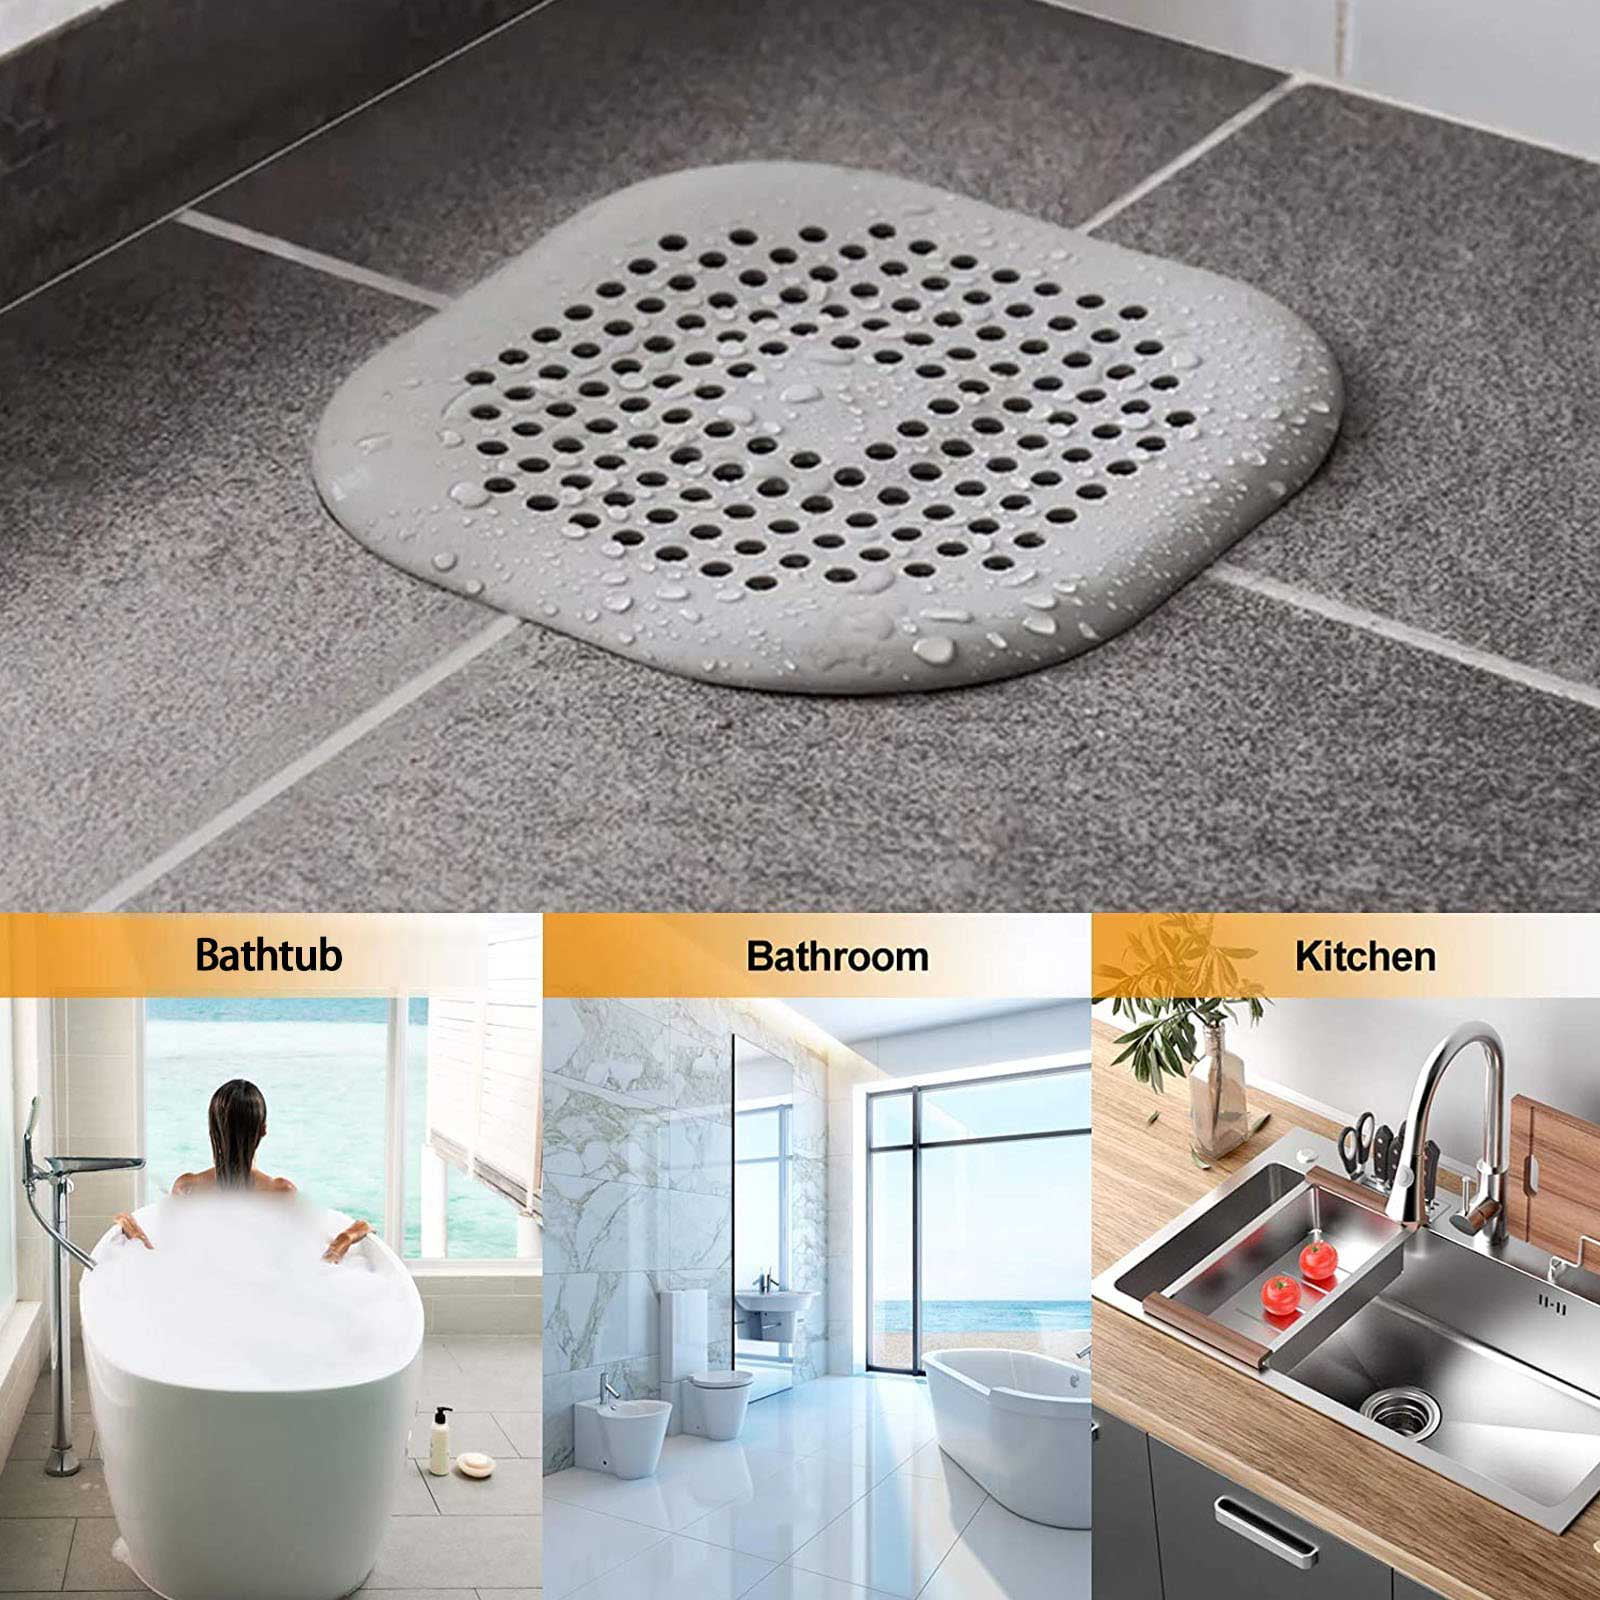 Hair Drain Catcher,Raised Square Shower Drain Covers with Suction Cup for  Pop-up Stopper 2 Pack (Grey)